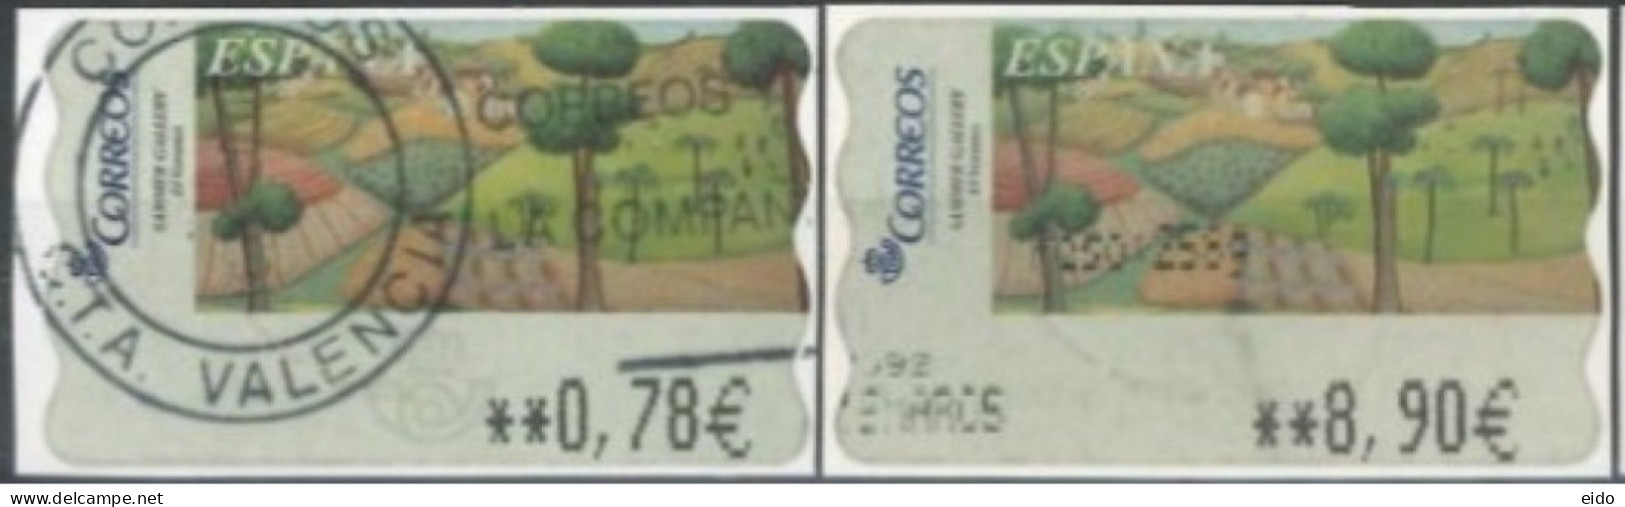 SPAIN - 2005 -  SAMER GALLERY, VERANO STAMPS LABELS SET OF 2 OF DIFFERENT VALUES, USED . - Usados